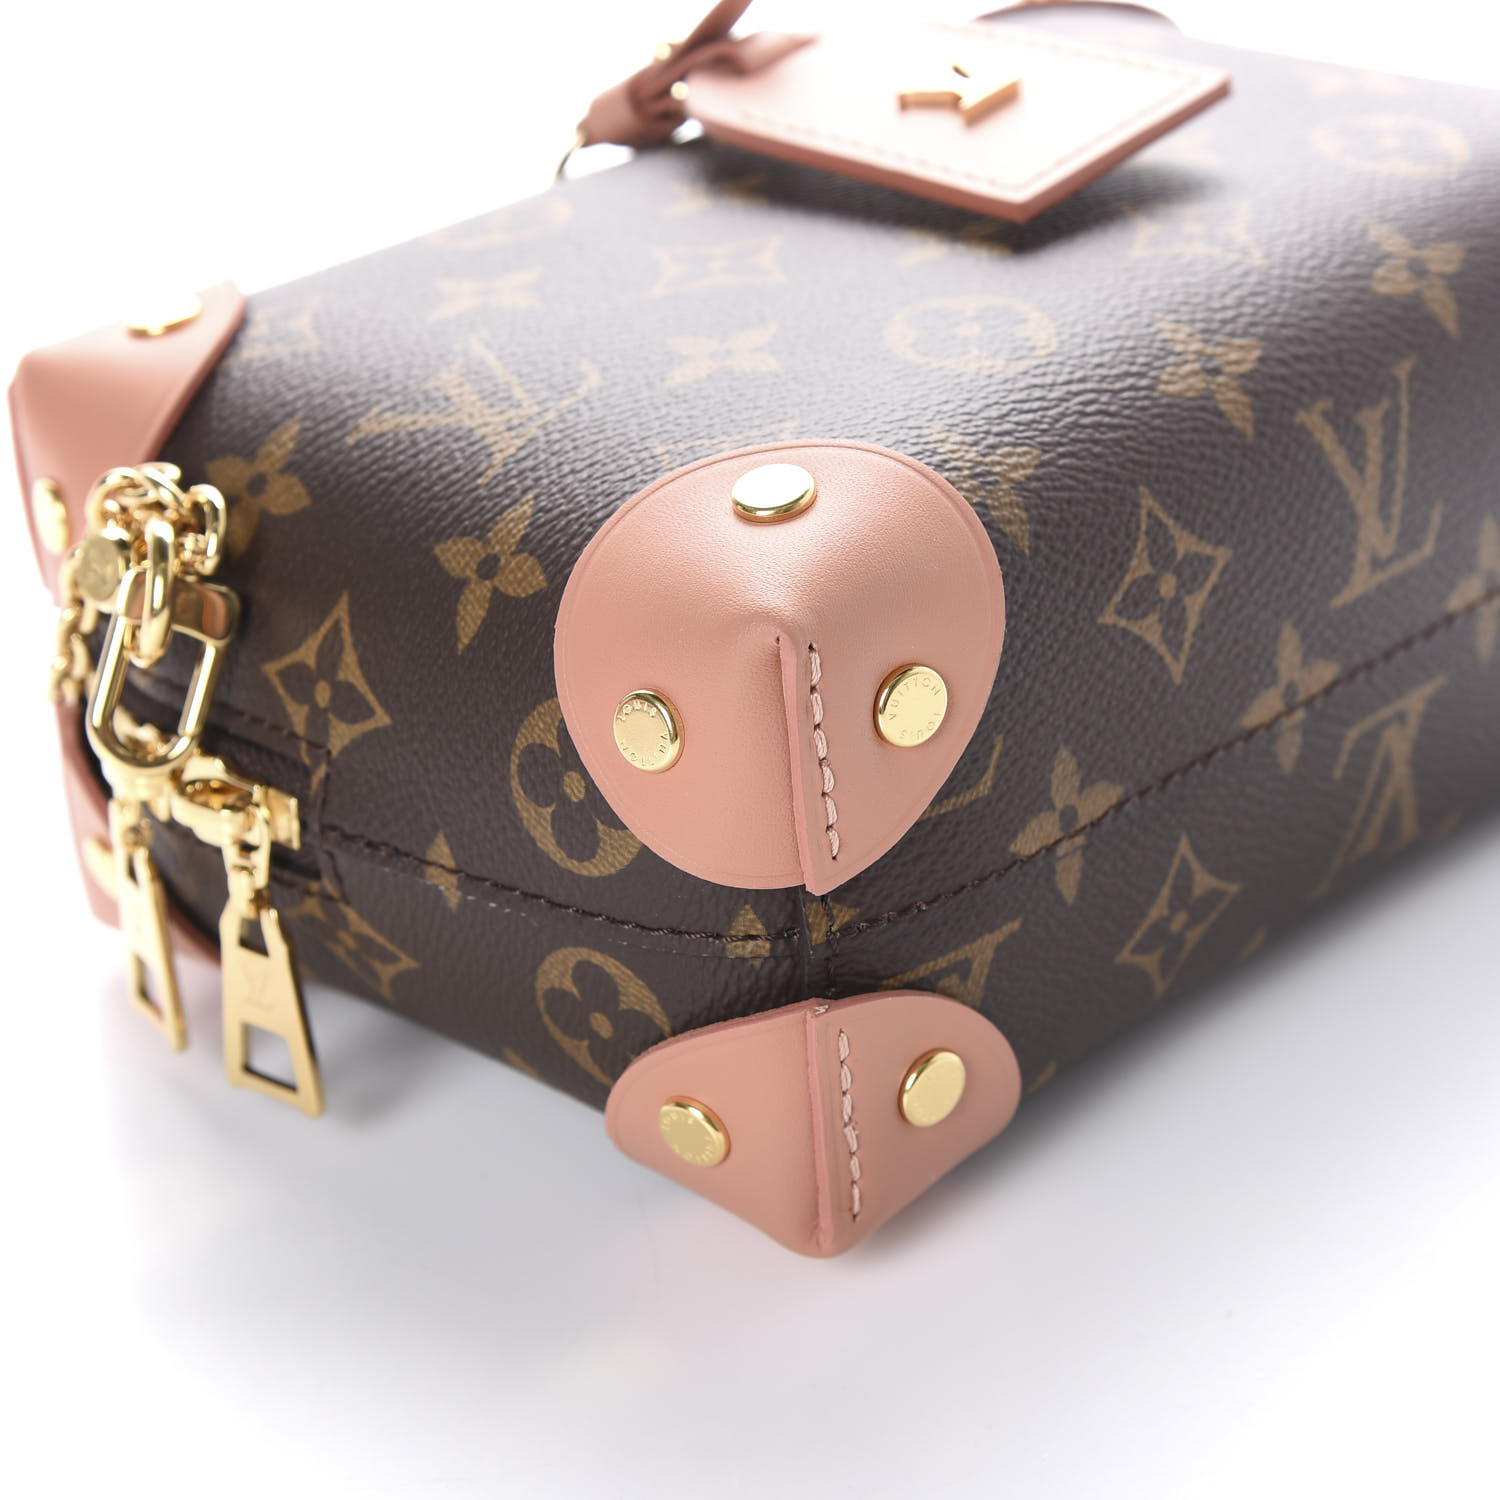 LOUIS VUITTON Cuir Gold Monogram Embossed Theda PM - Sale